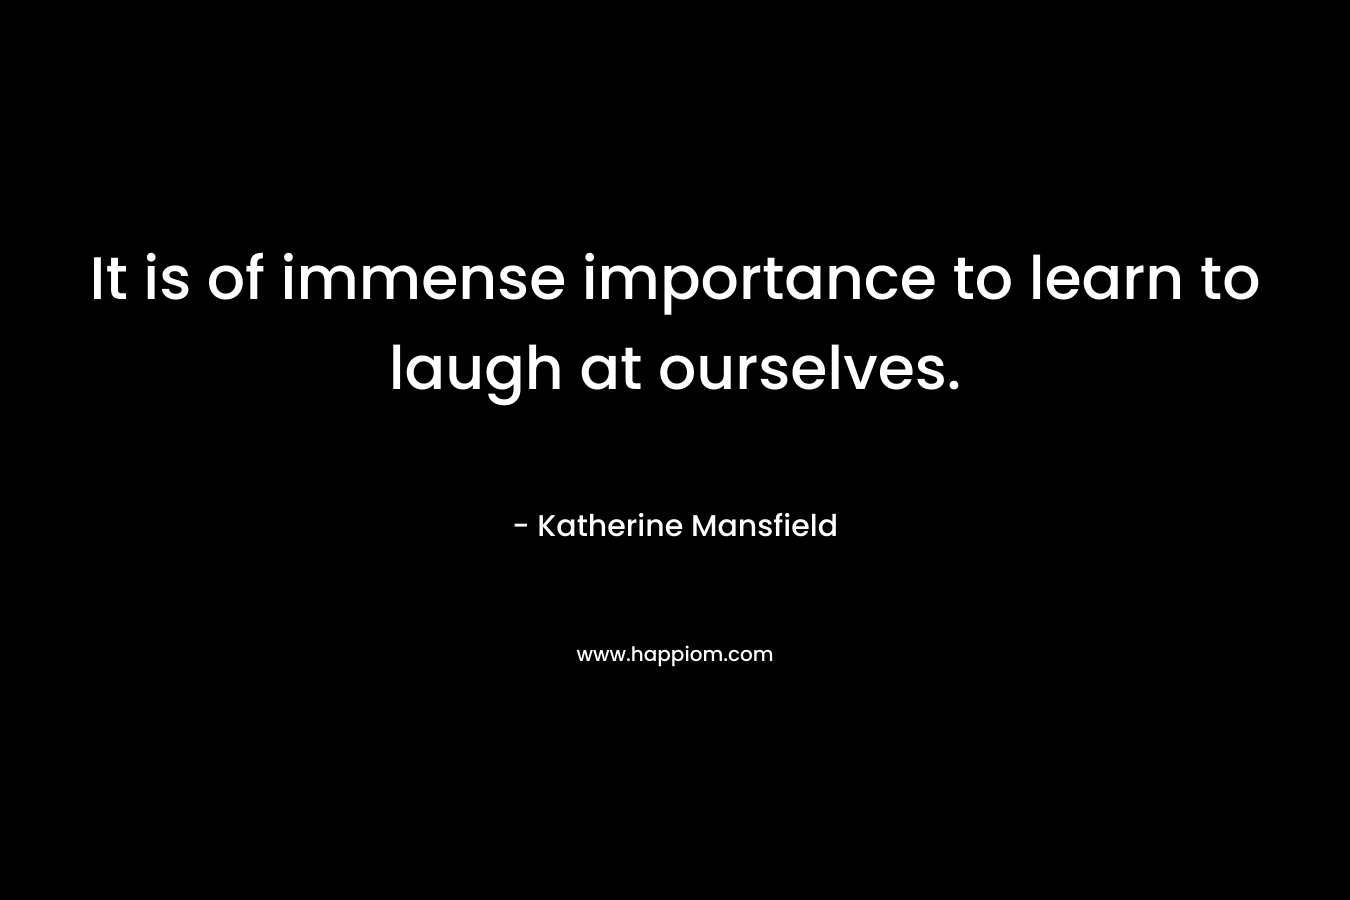 It is of immense importance to learn to laugh at ourselves. – Katherine Mansfield